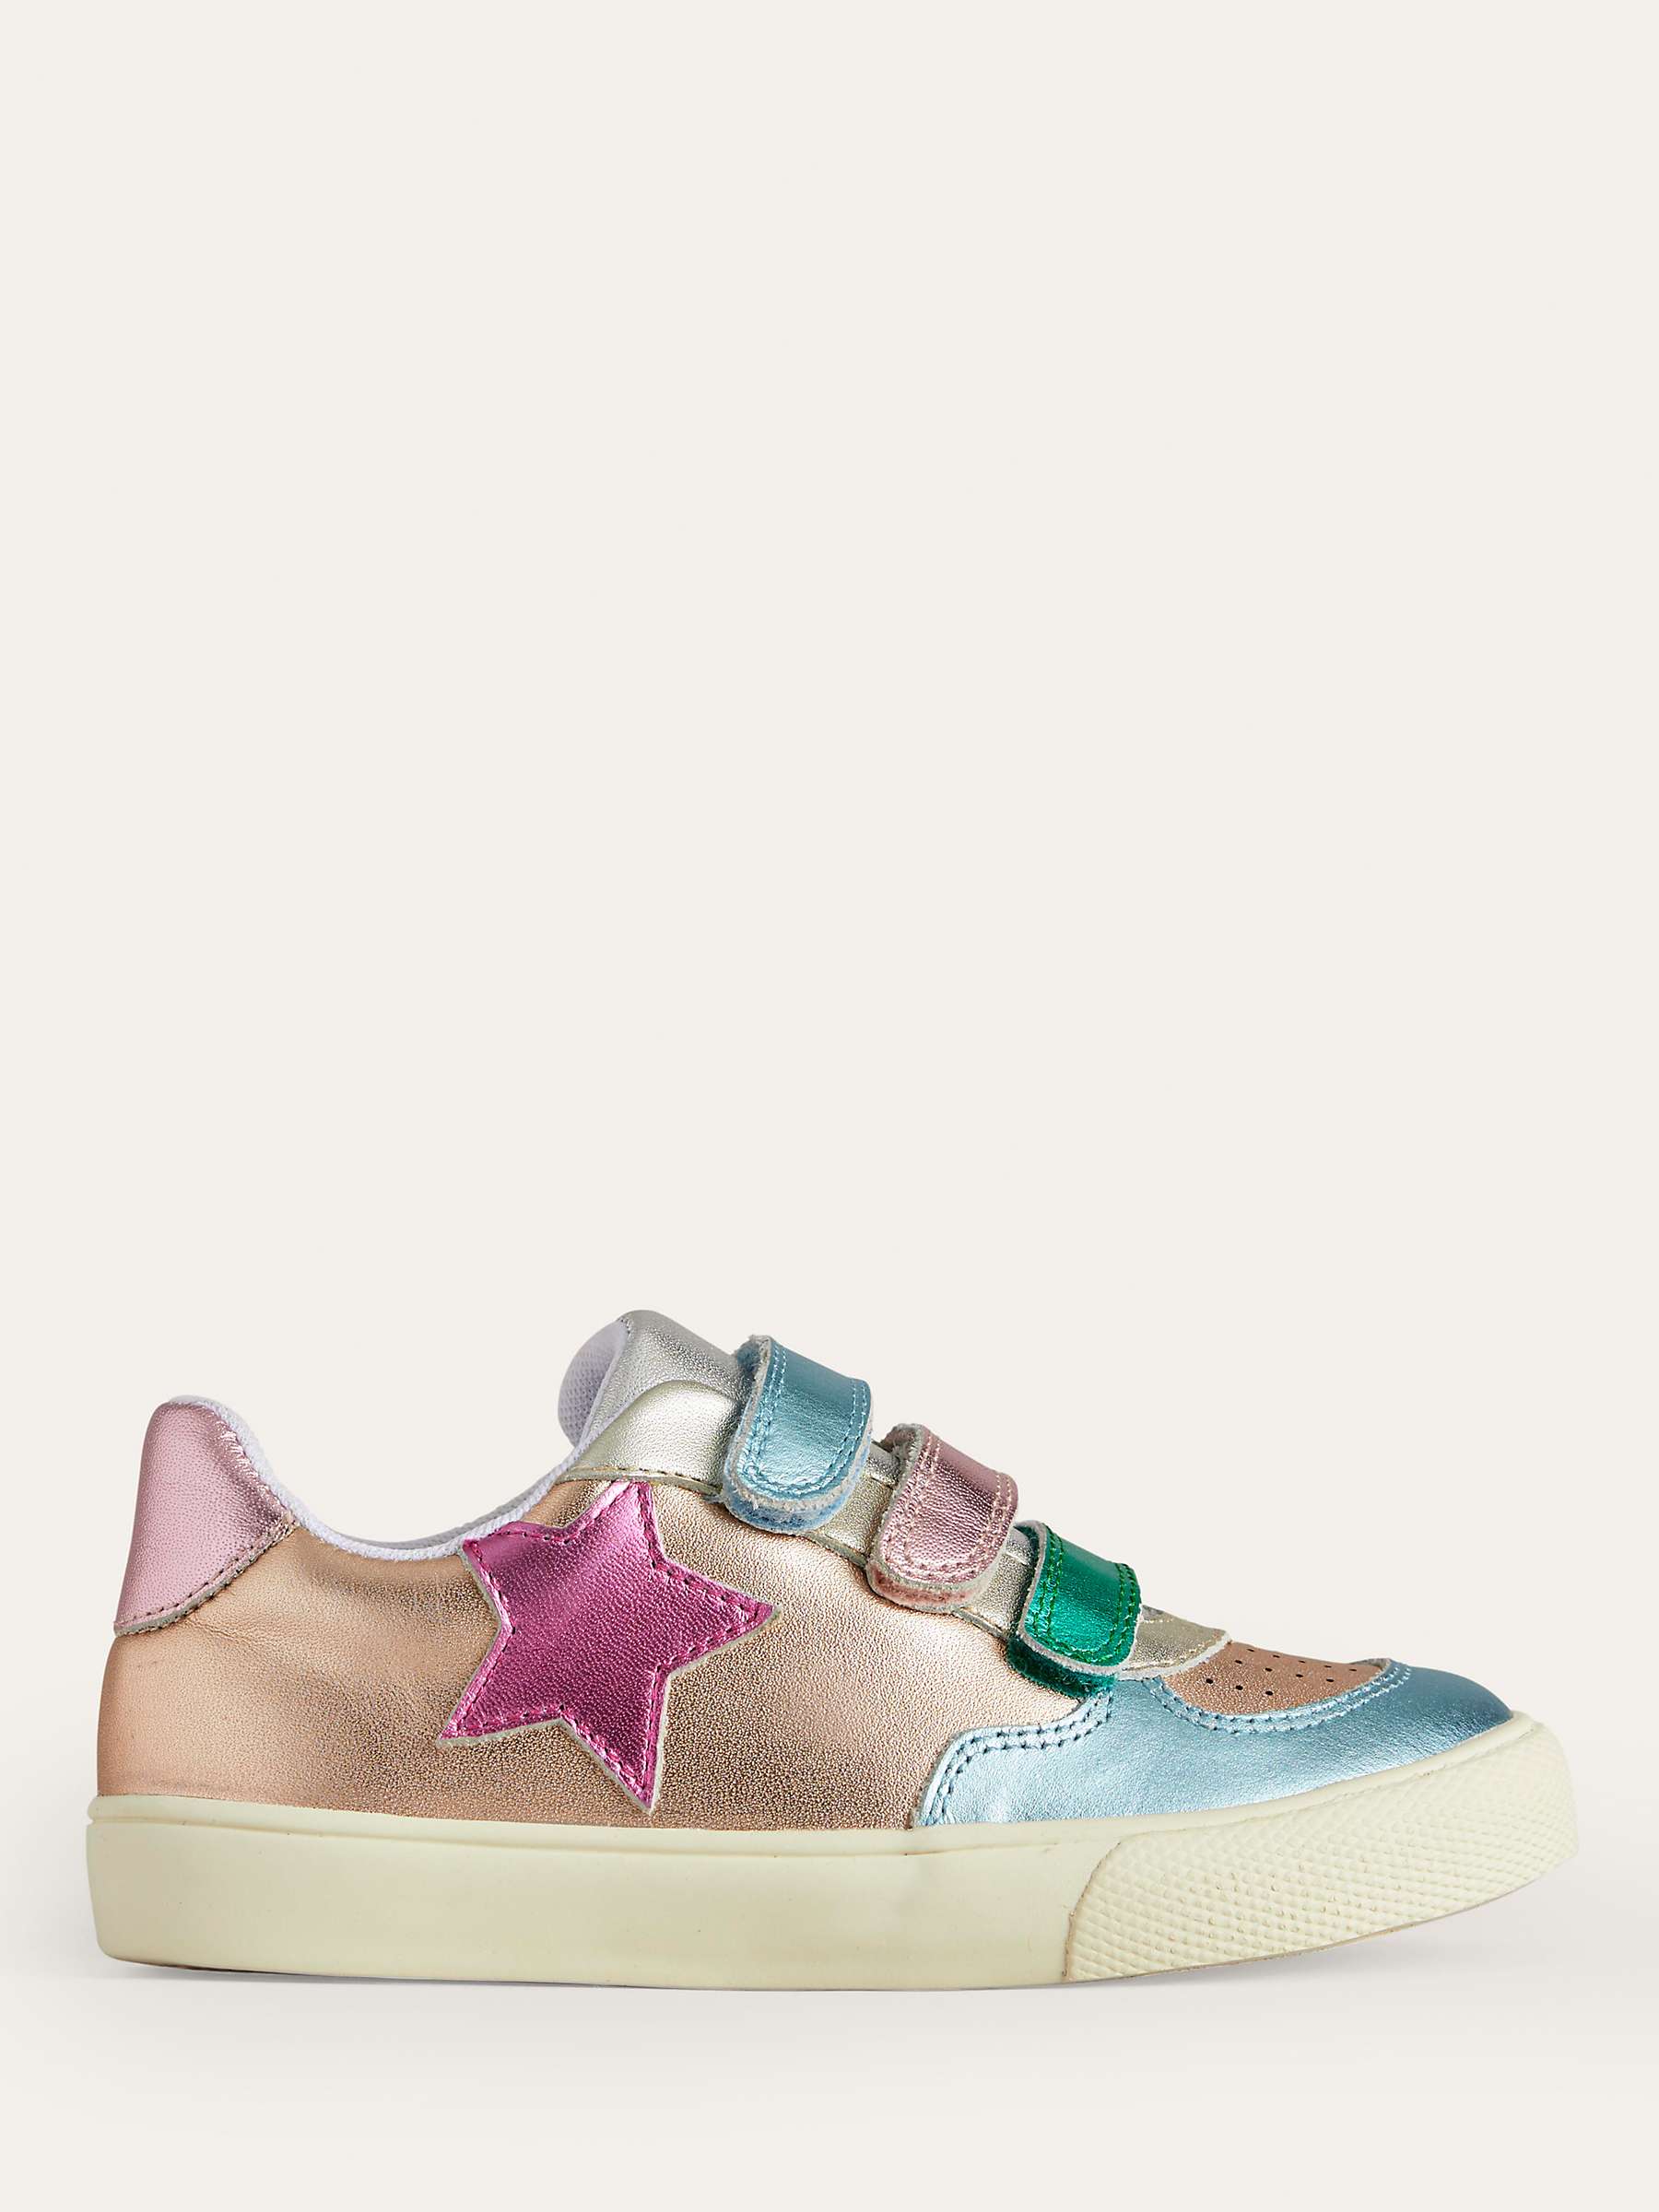 Buy Mini Boden Kids' Leather Low Top Metallic Star Trainers, Multi Online at johnlewis.com